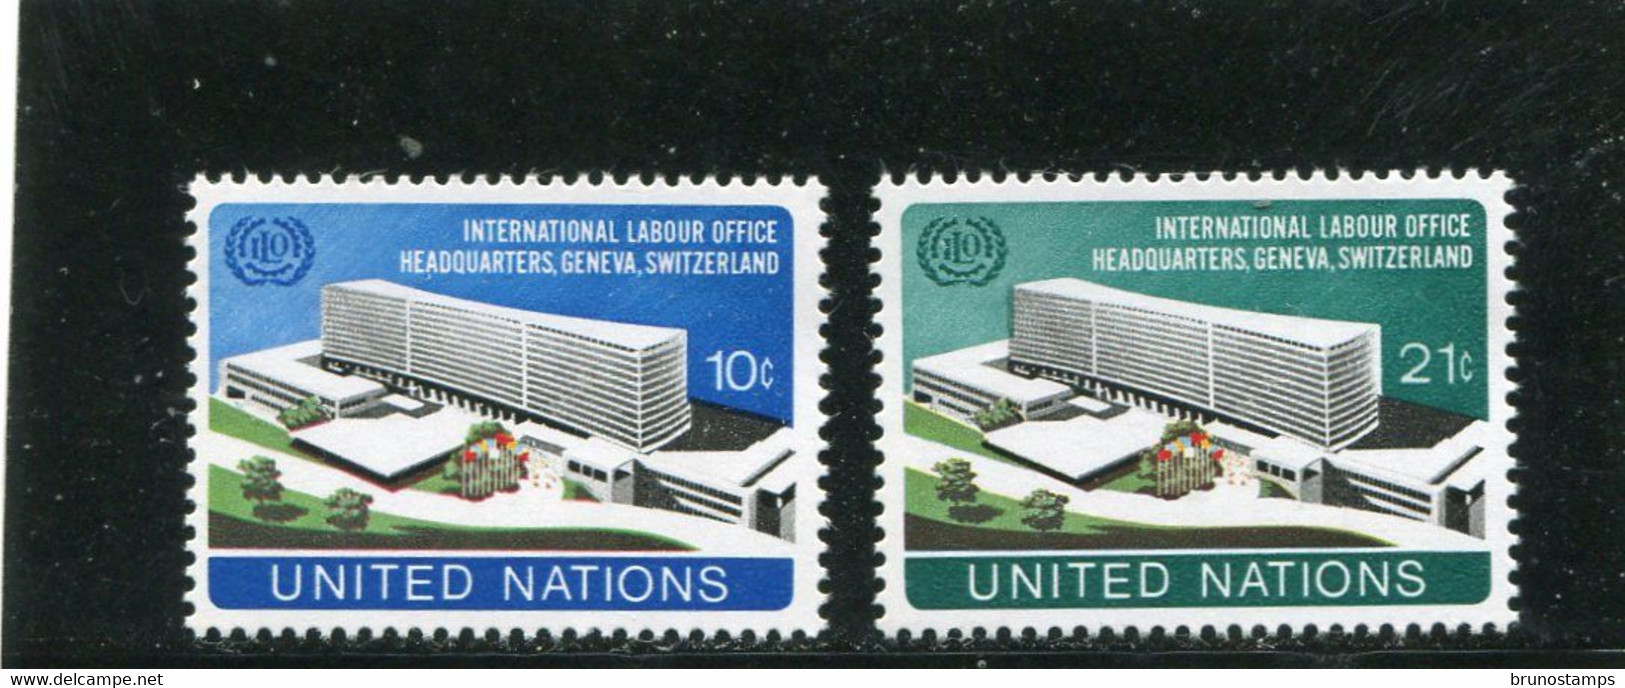 UNITED NATIONS - NEW YORK   - 1974  LABOUR OFFICE HEADQUARTES GENEVA  SET   MINT NH - Unused Stamps